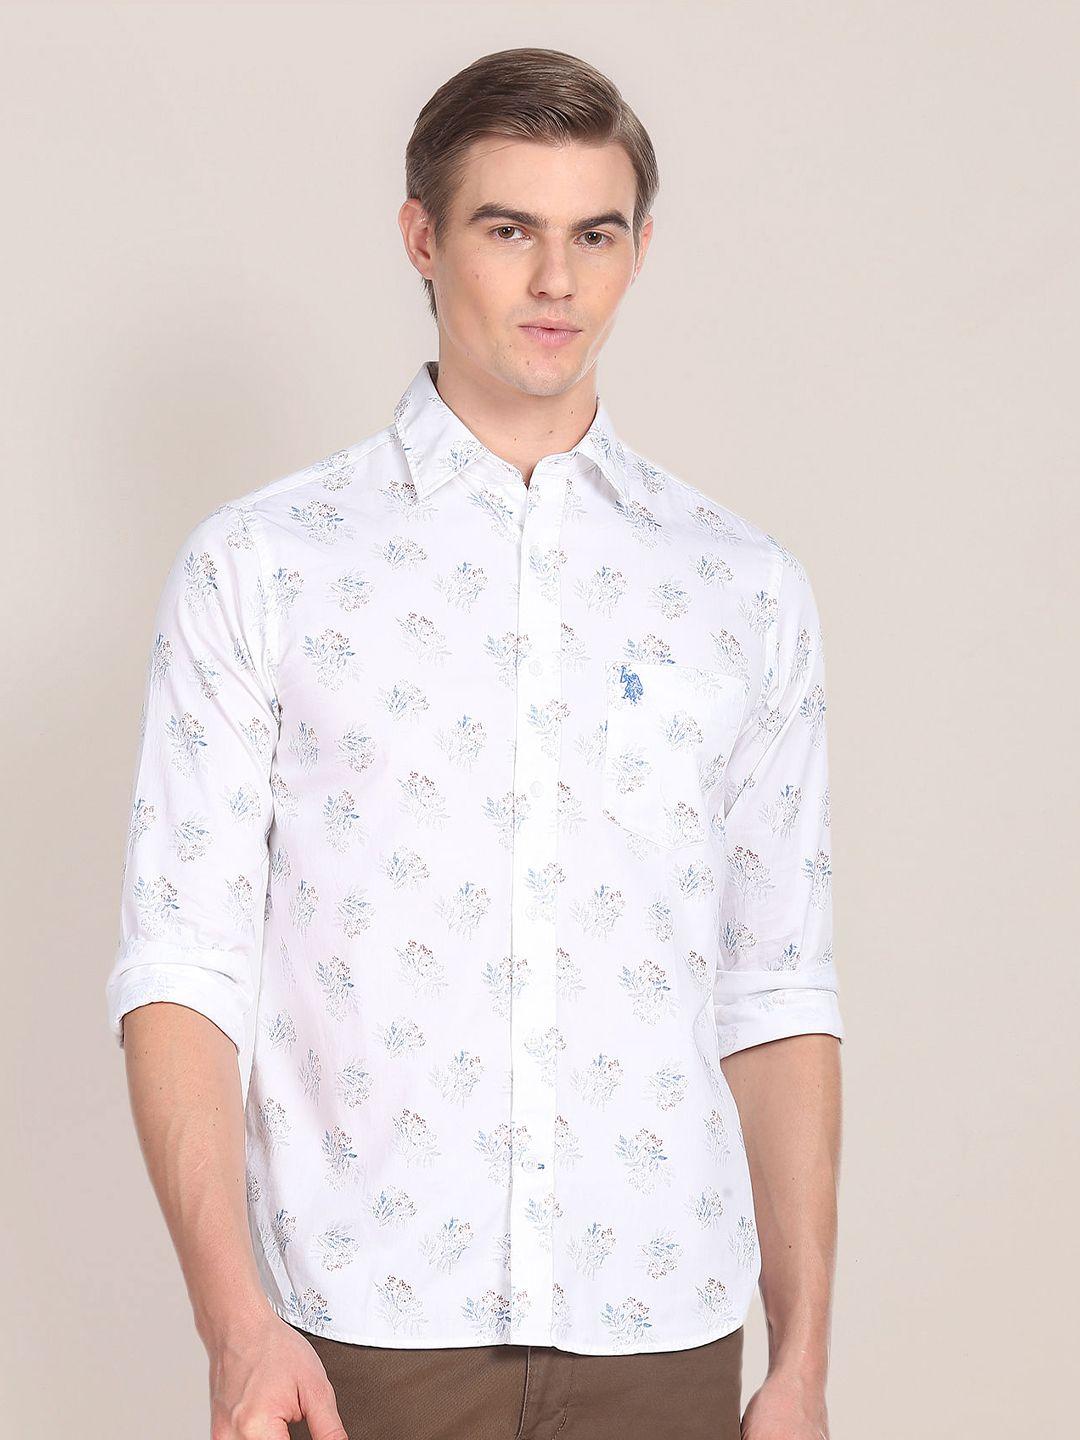 u.s. polo assn. premium tailored fit pure cotton printed casual shirt